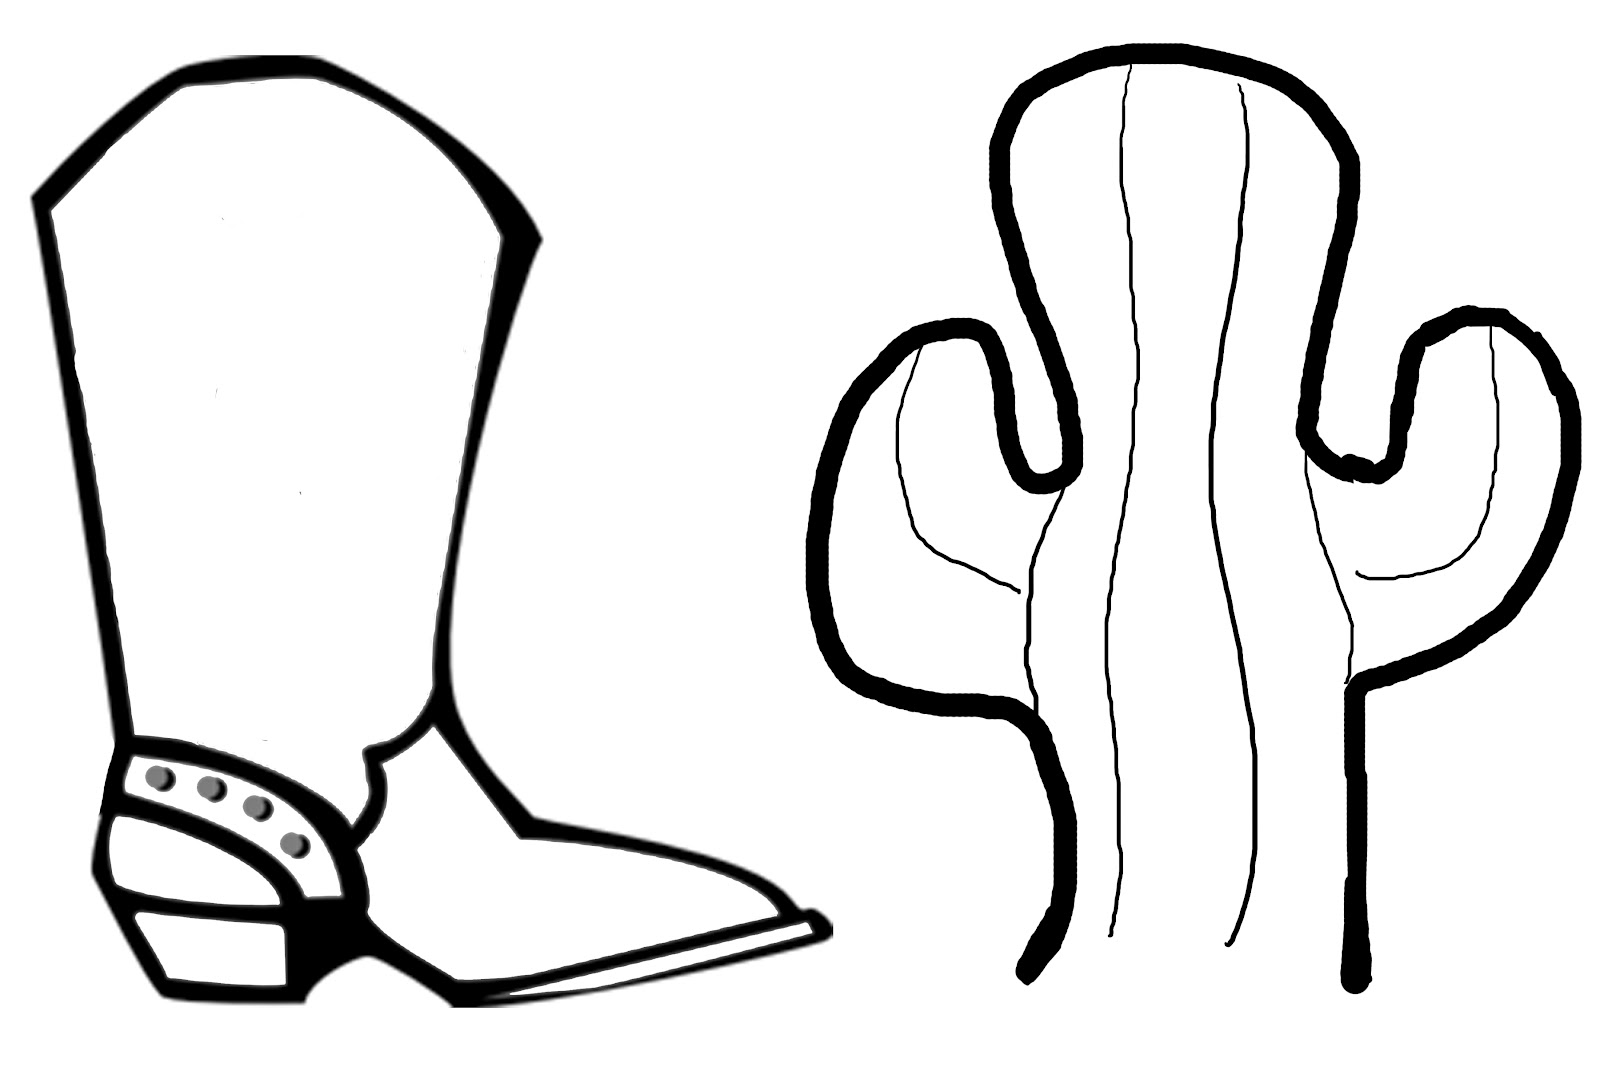 Cowboy Boot Clipart to Download - dbclipart.com